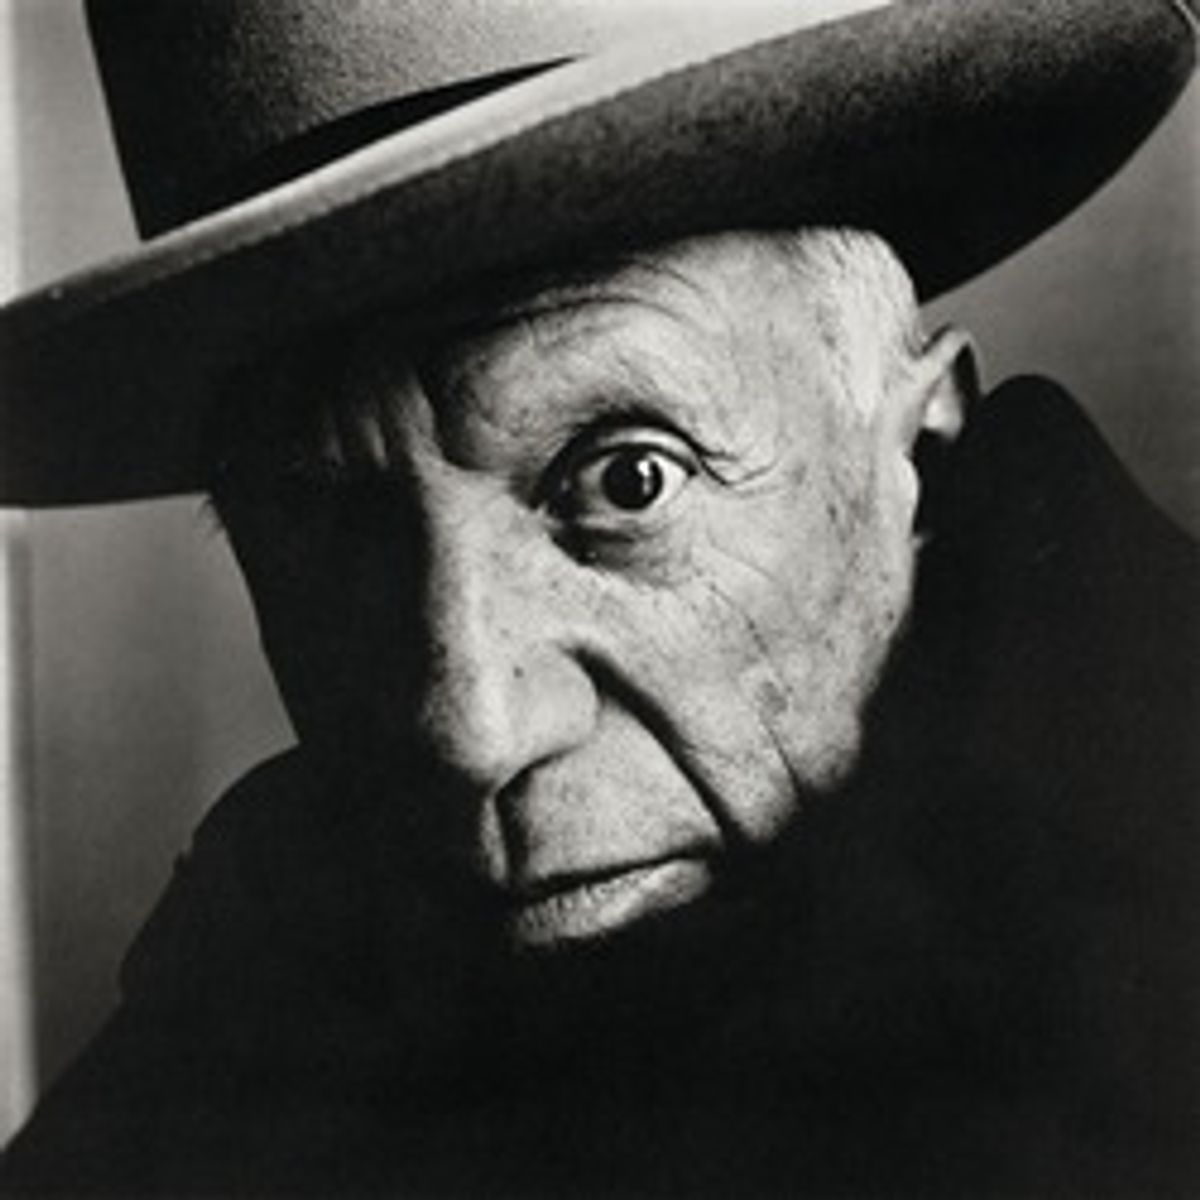 Pablo Picasso at La Californie, Cannes (1957) by Irving Penn (© The Irving Penn Foundation)